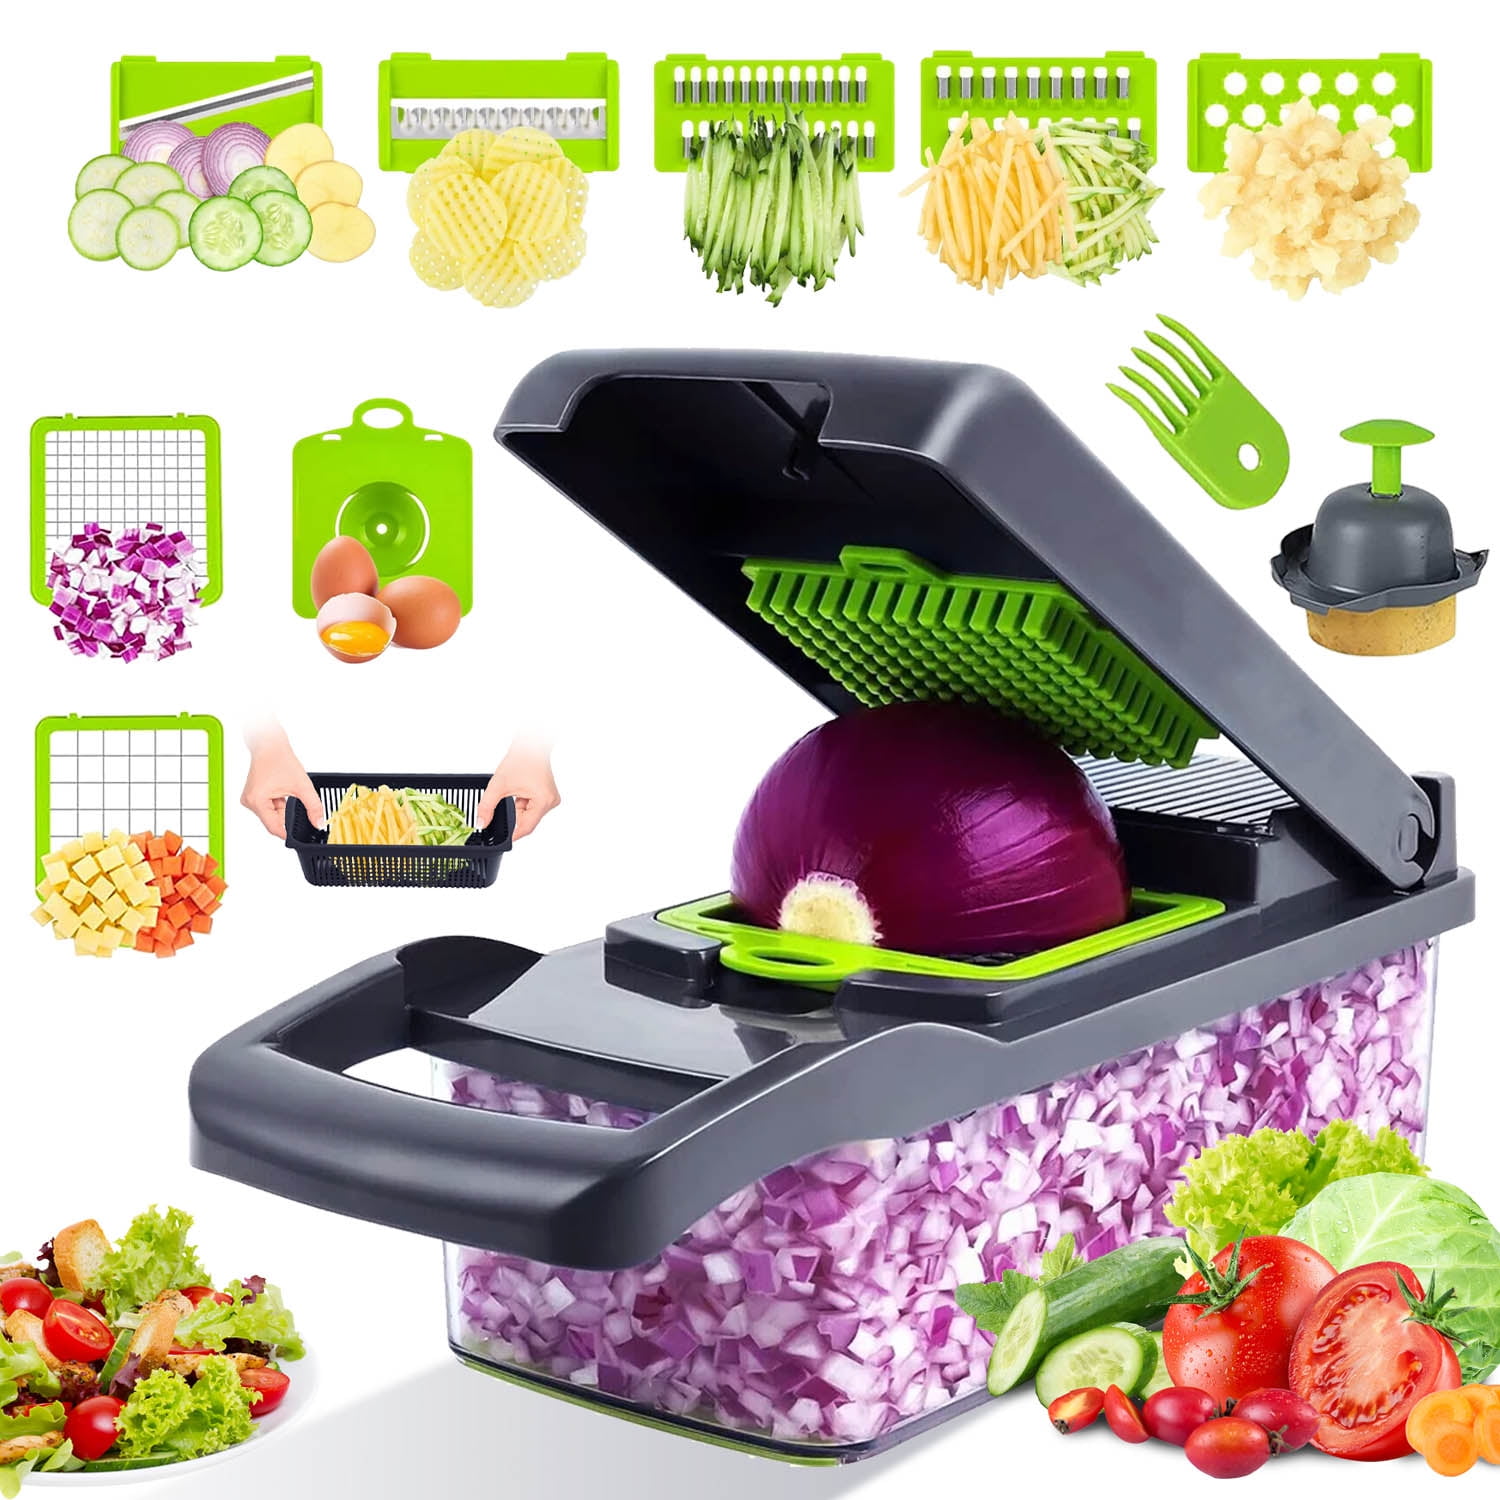  plutuus Vegetable Chopper,12-in-1 Multifunctional Veggie Chopper,Kitchen  Vegetable Slicer Dicer Cutter,Potato Onion Food Chopper with Vegetable  Peeler,Hand Guard & Container: Home & Kitchen